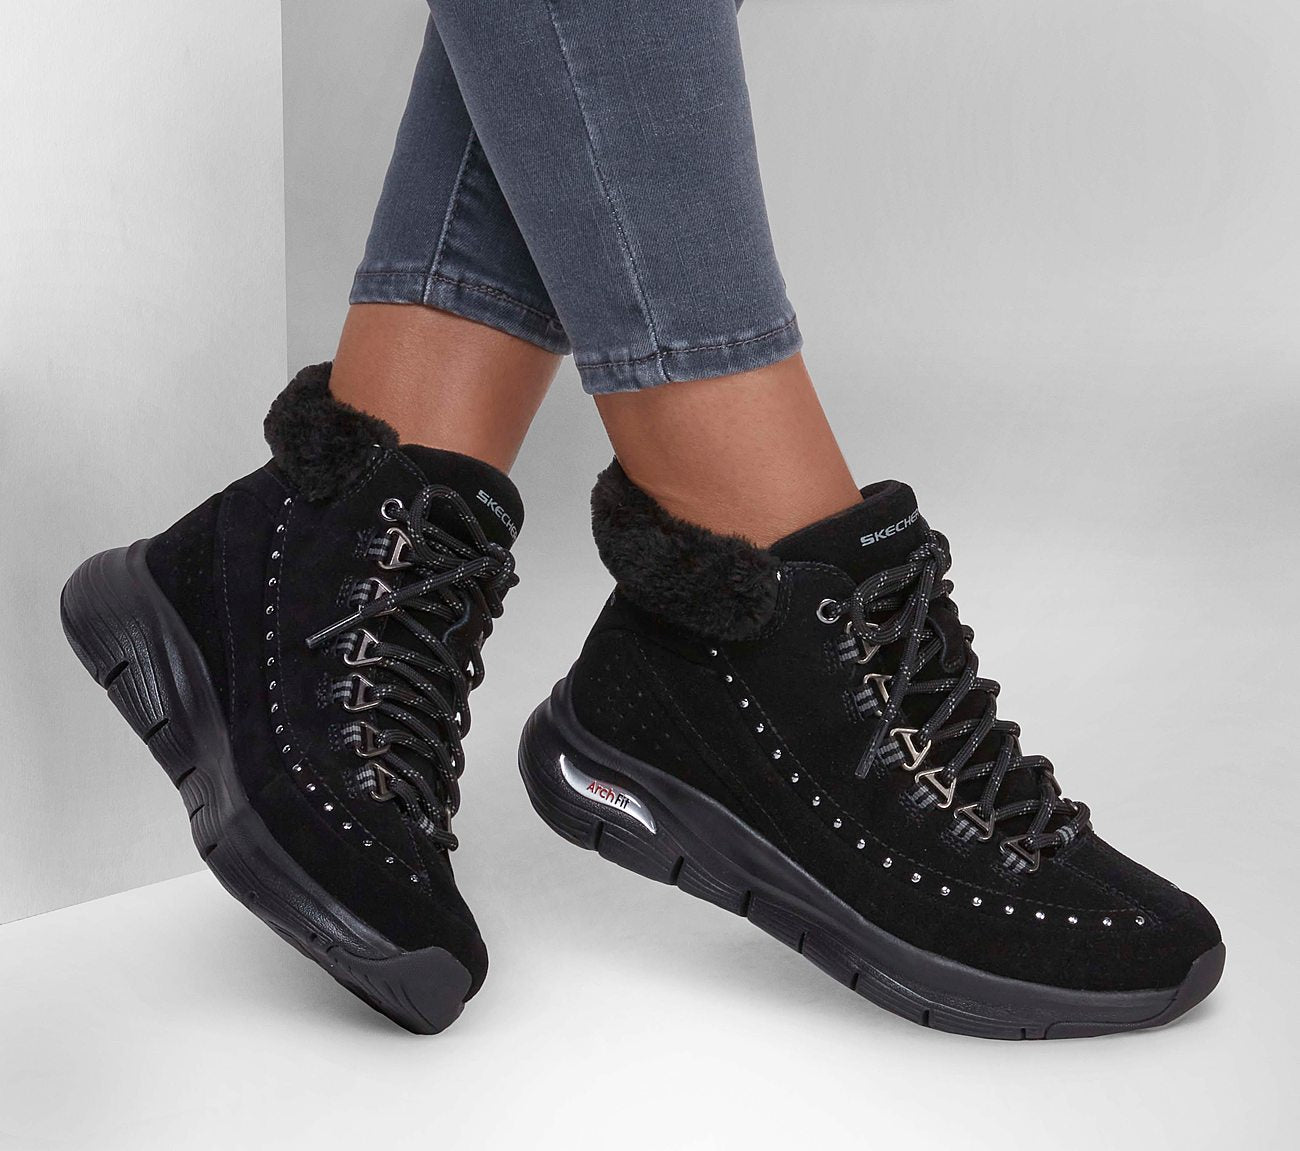 Arch Fit - Goodnight - Water Resistant Boot Skechers